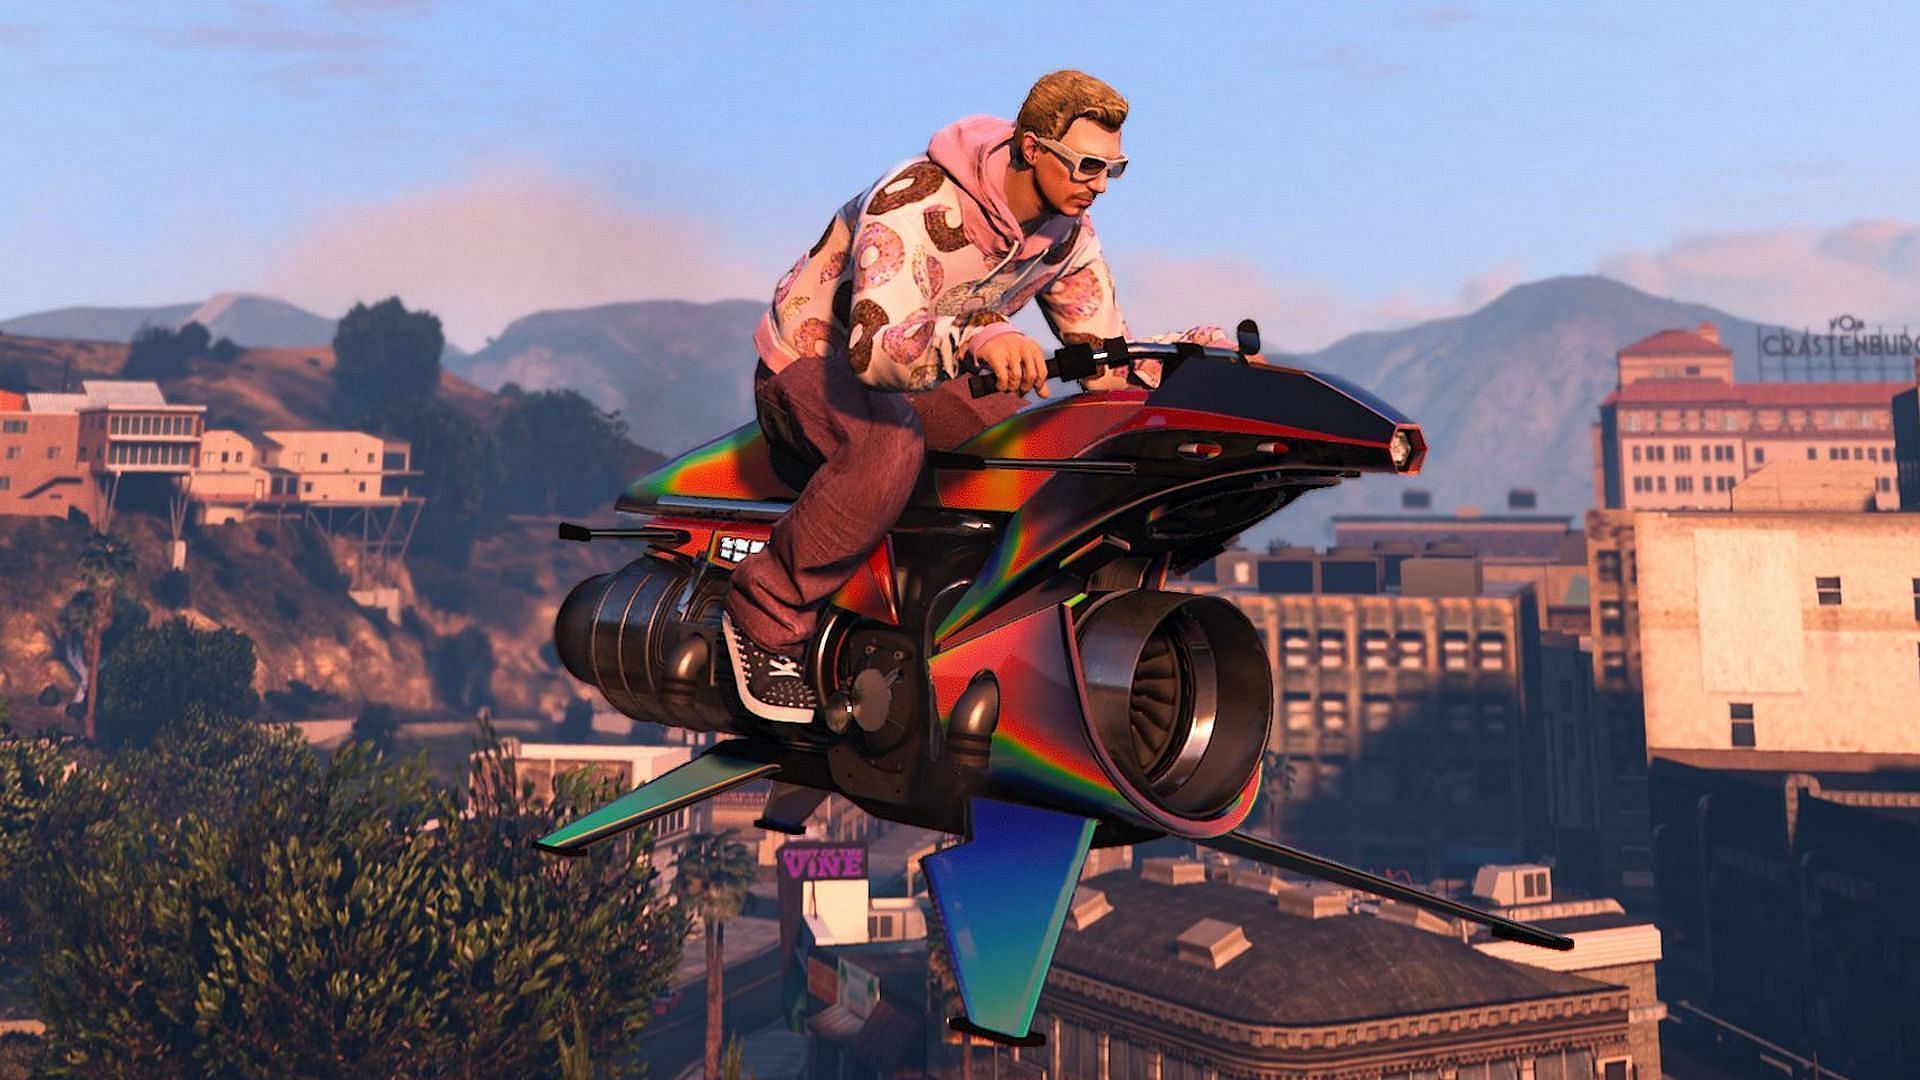 This motorcycle is now one of the most expensive vehicles in GTA Online (Image via Rockstar Games)